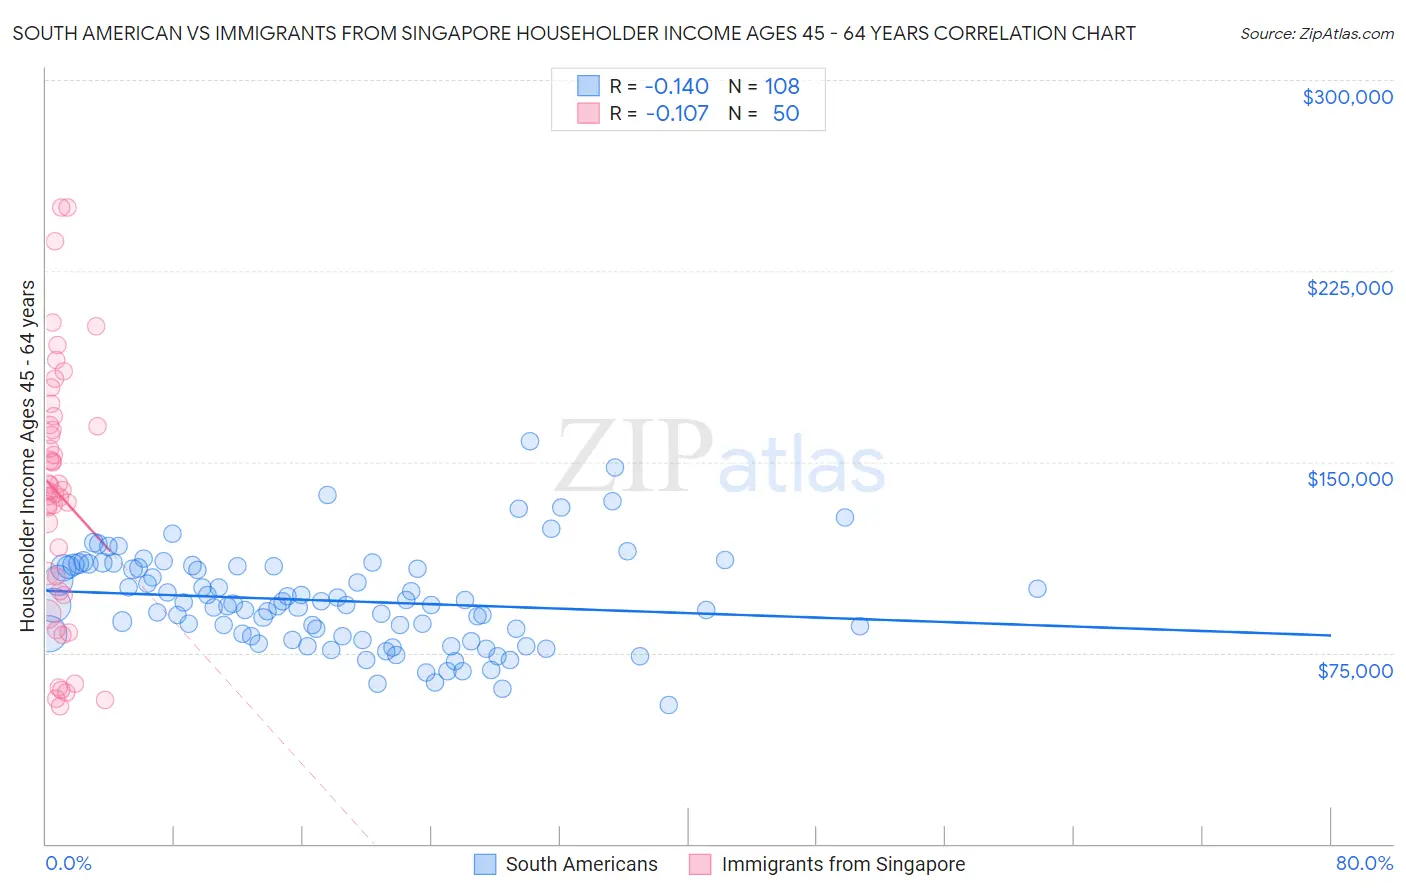 South American vs Immigrants from Singapore Householder Income Ages 45 - 64 years